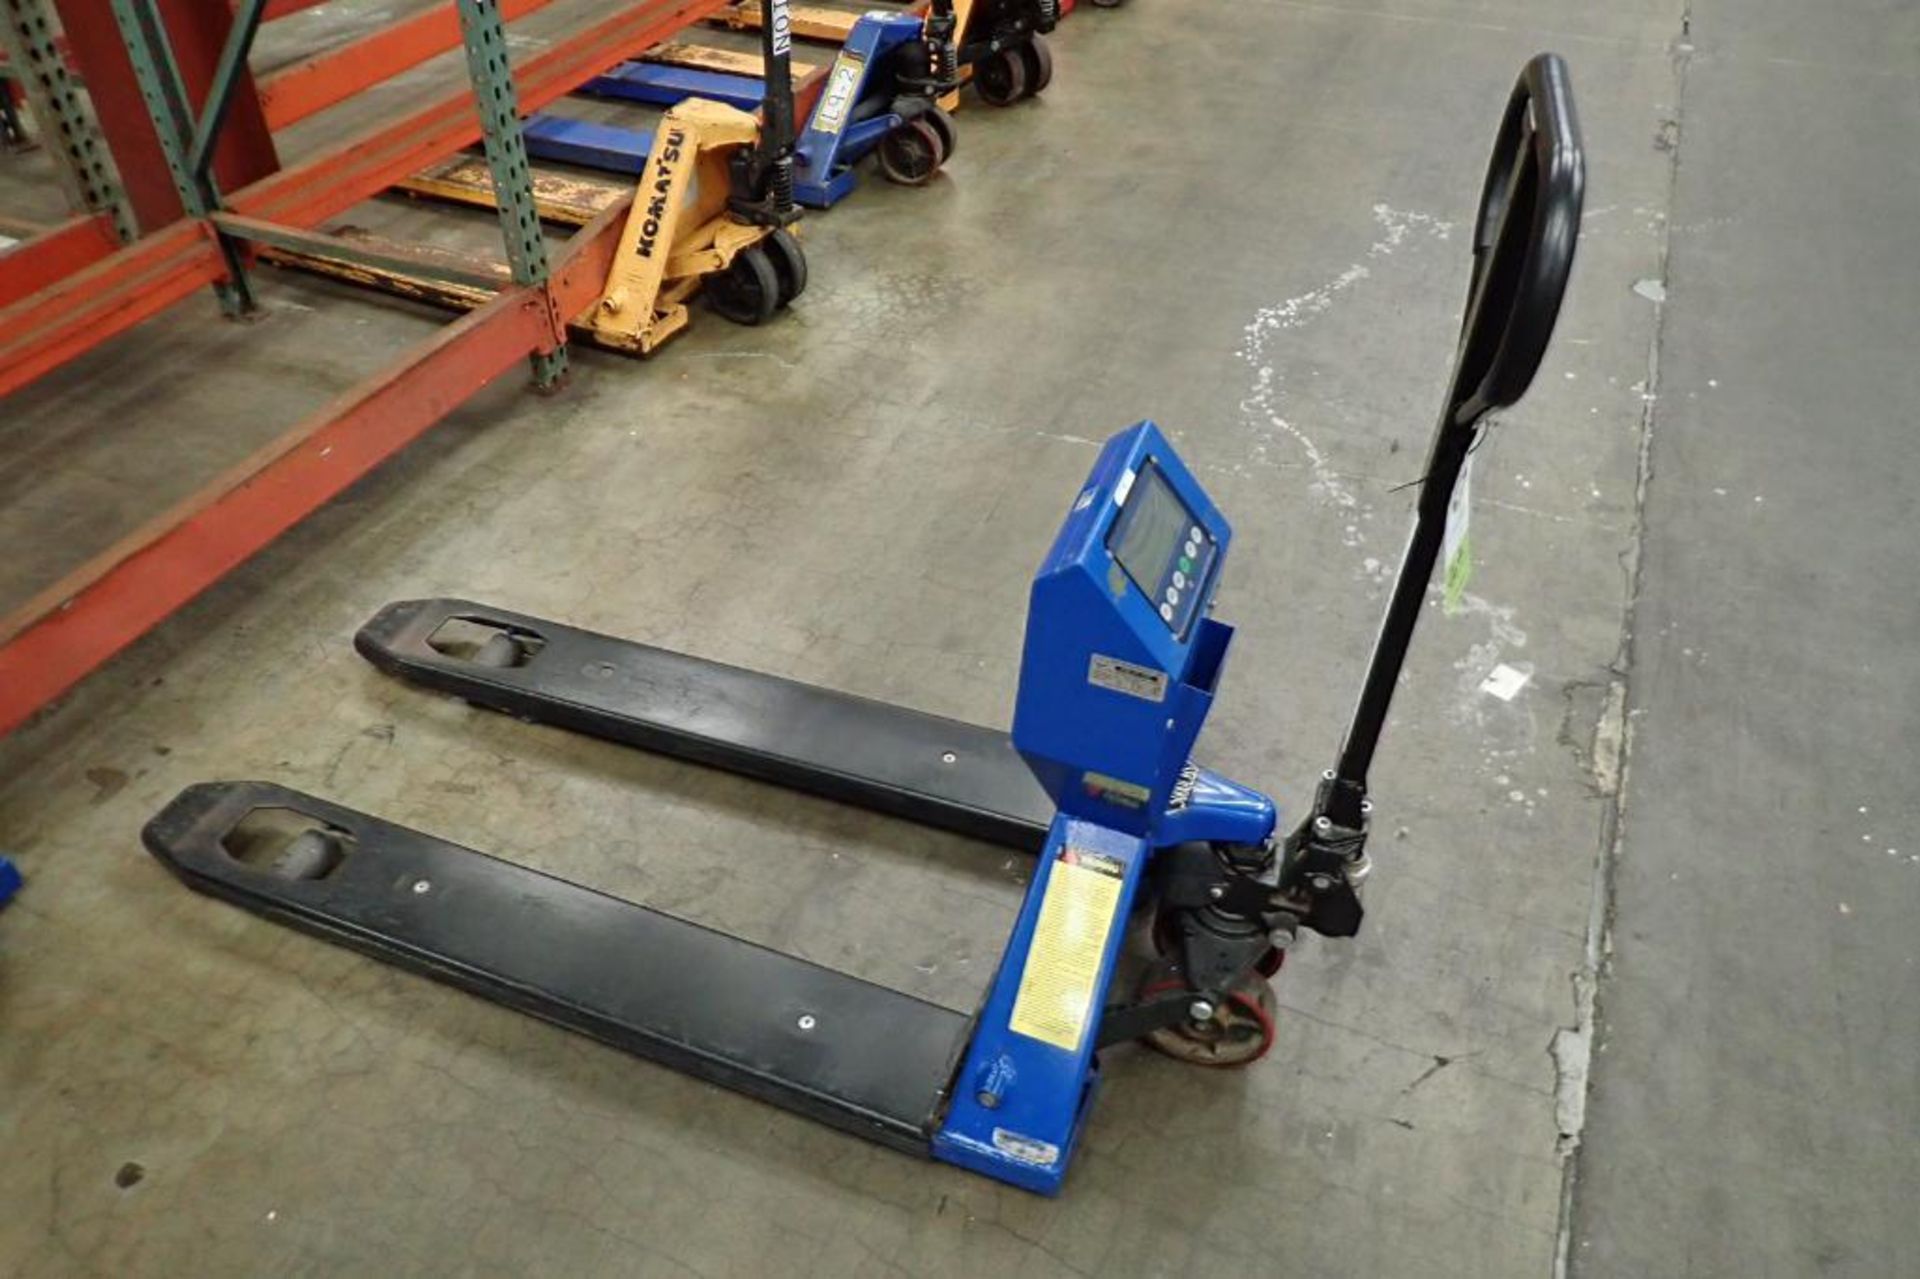 Global Industrial hand pallet jack, SN 377828, with Mettler Toledo on board scale, 5000 lb capacity, - Image 2 of 5